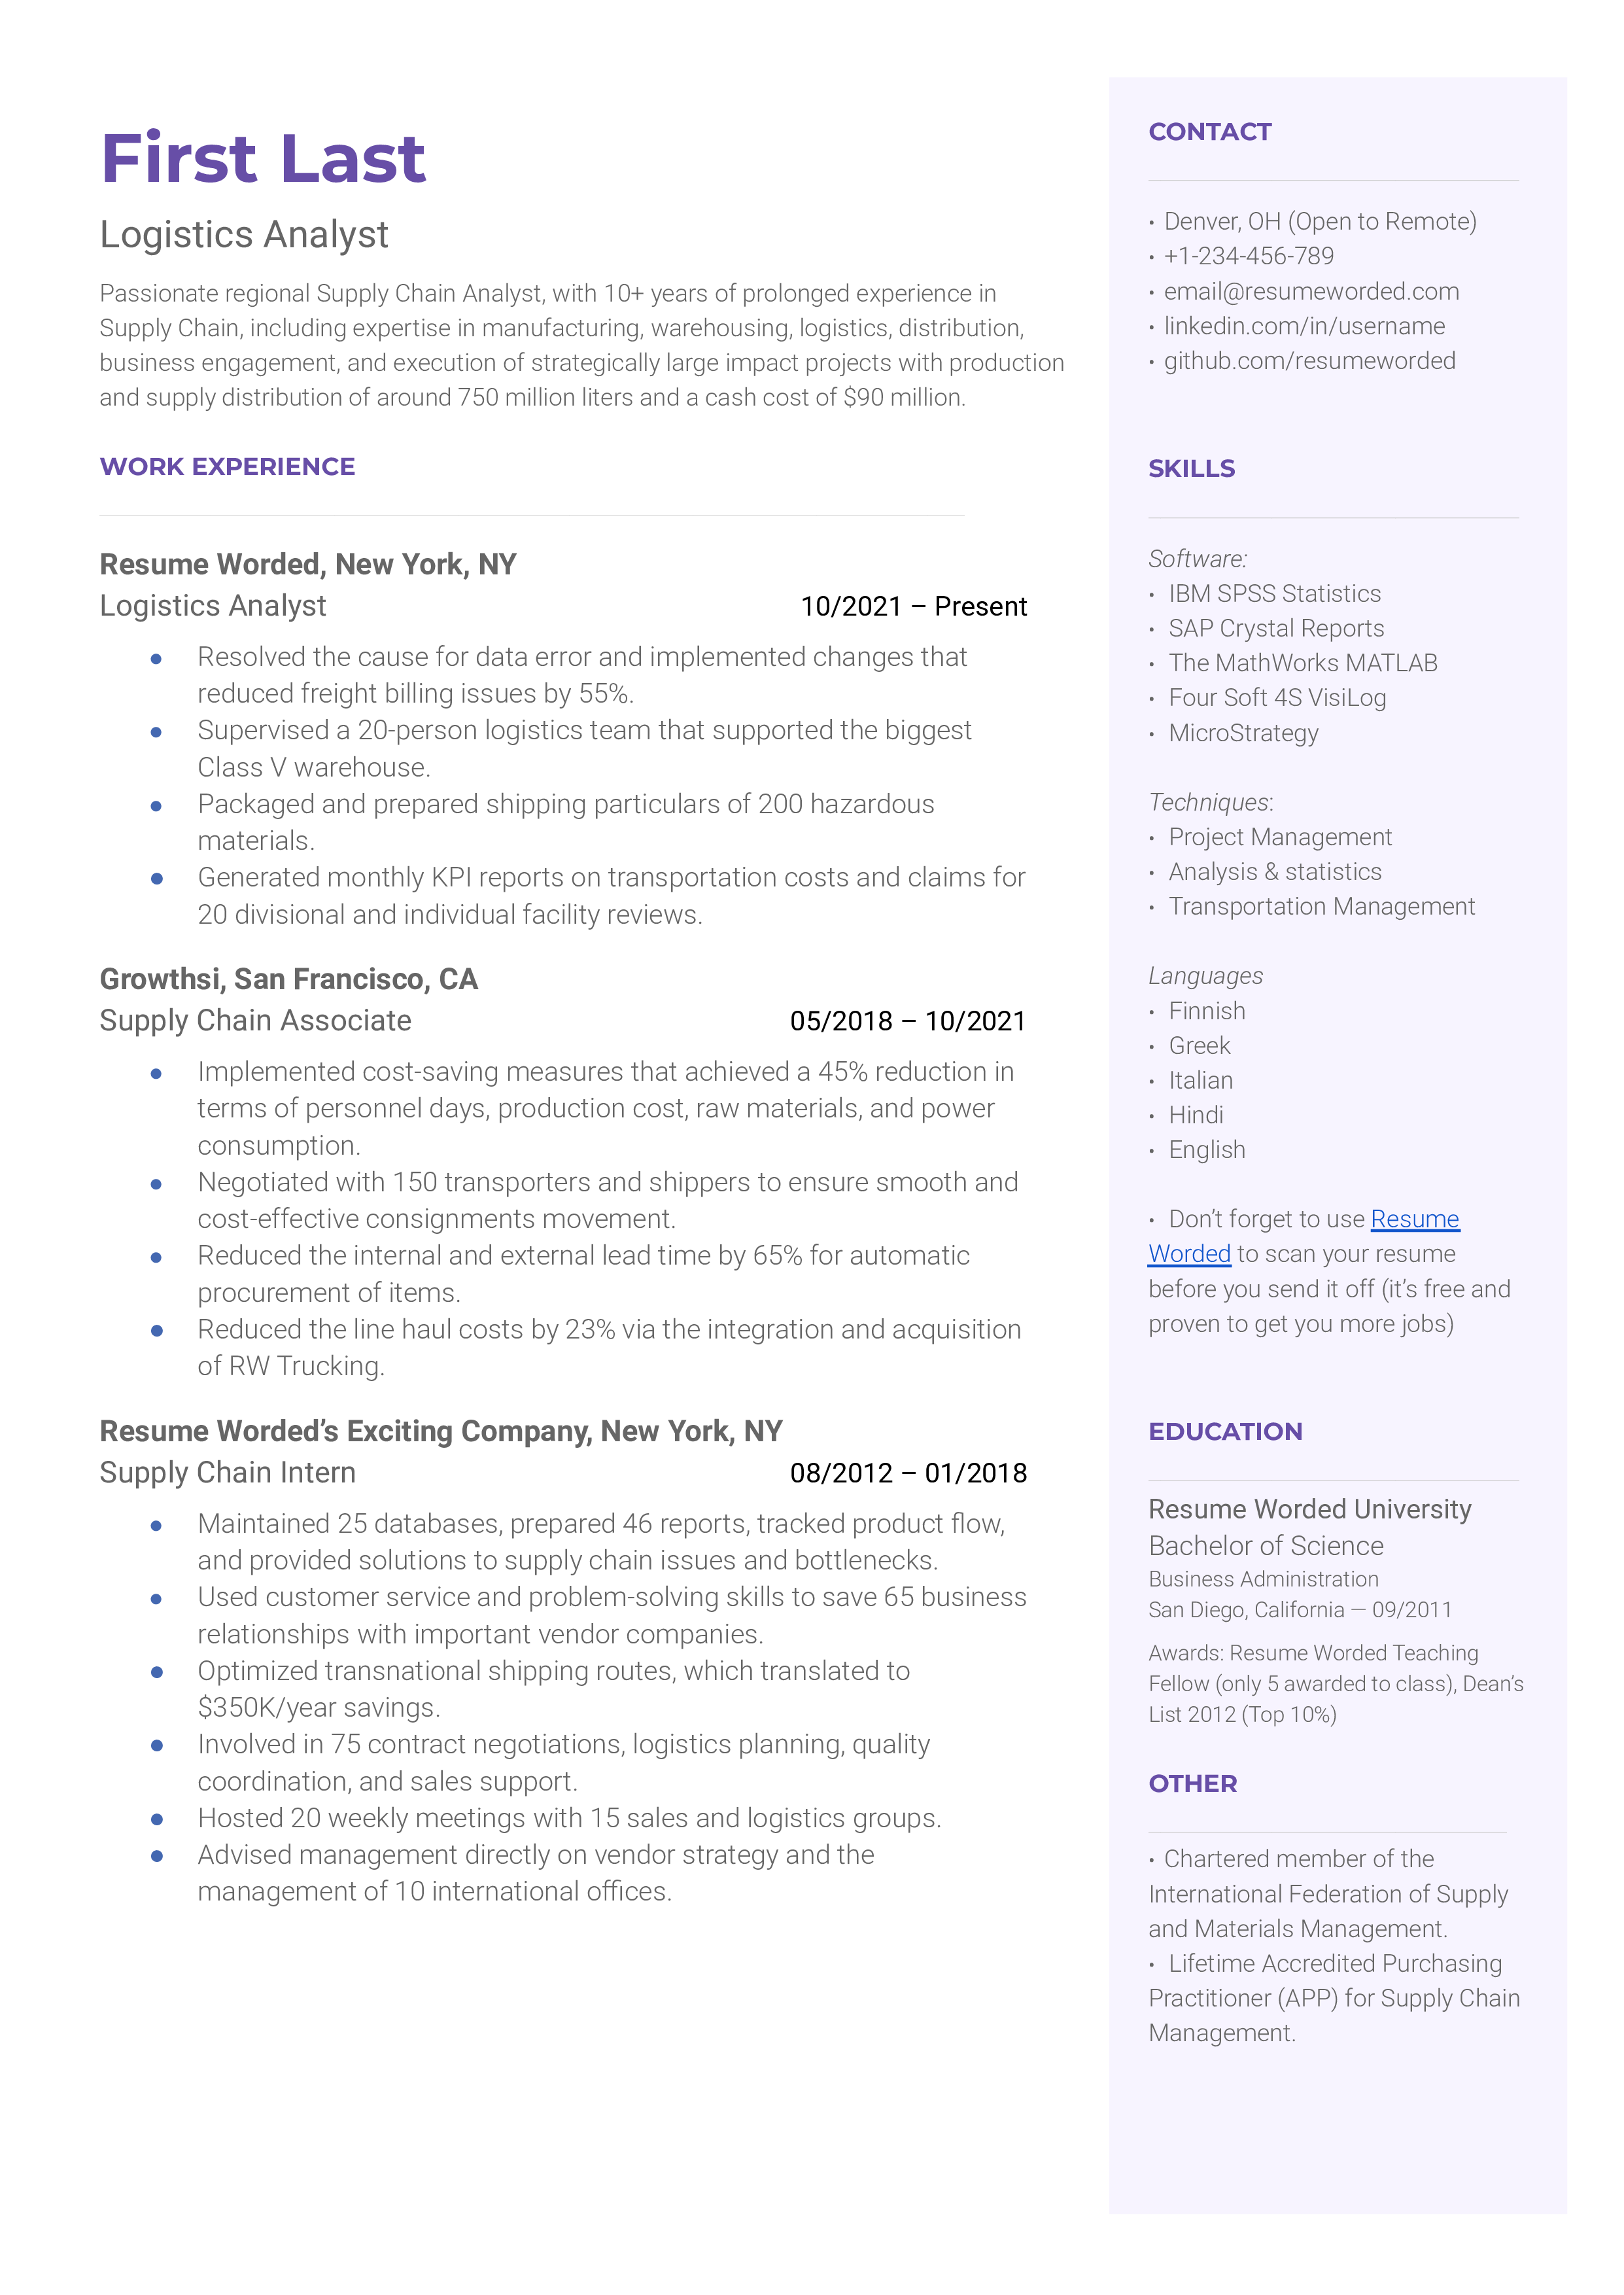 A logistics analyst resume that details relevant work experience